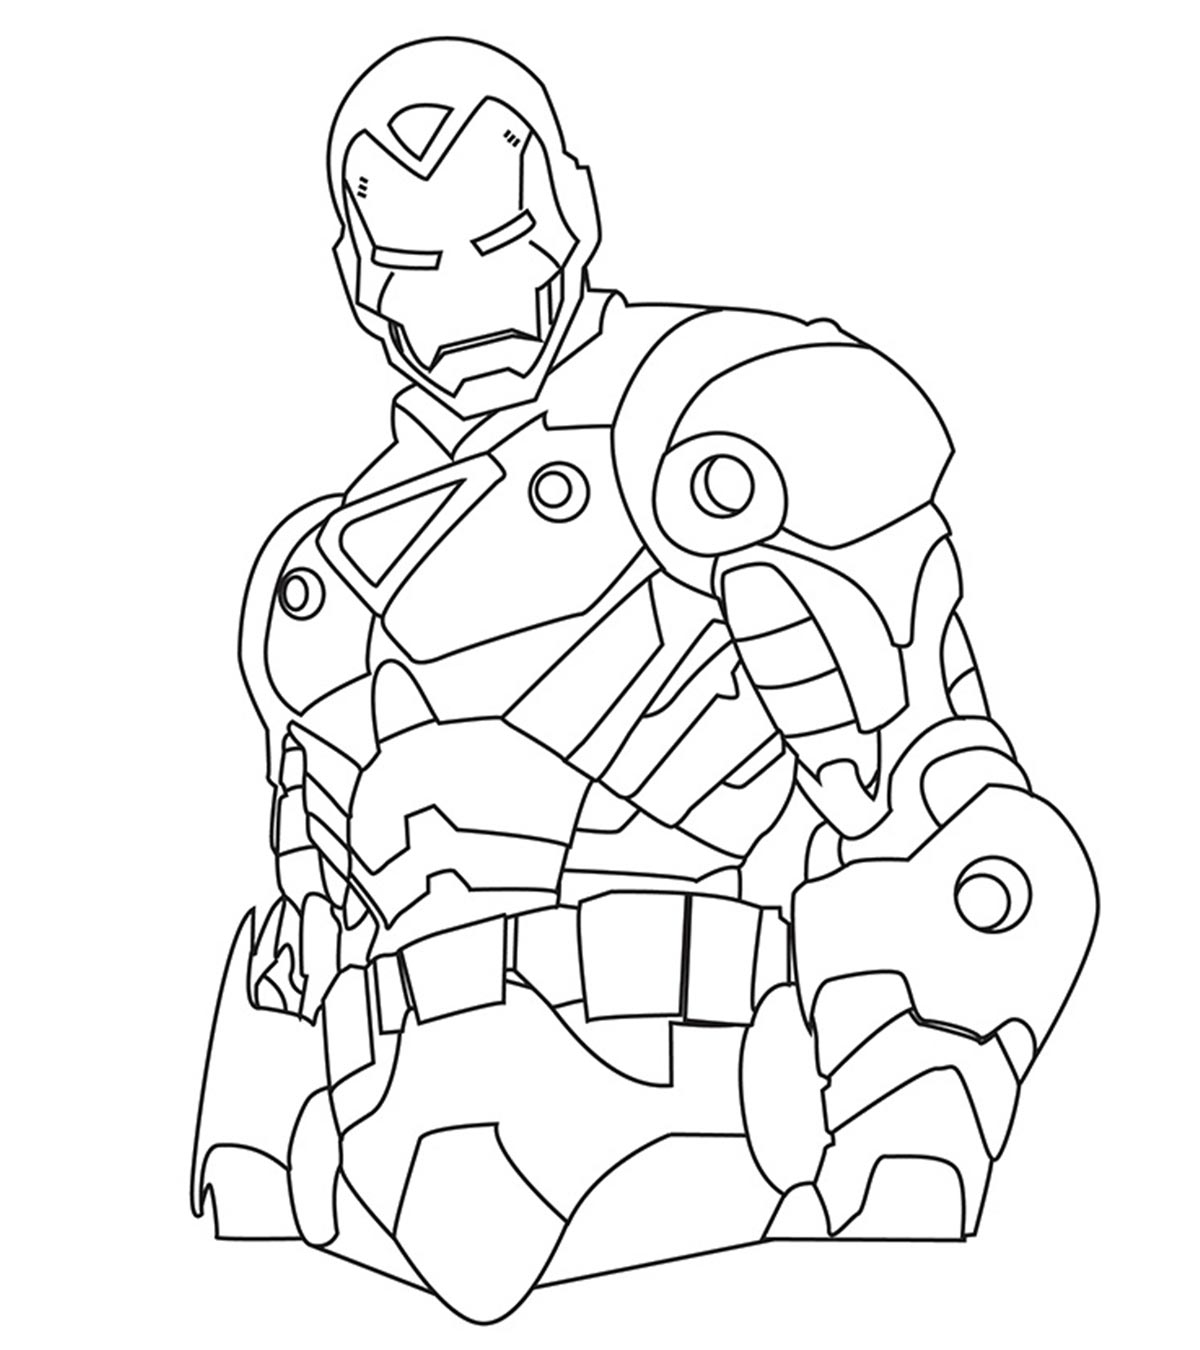 Top 20 Iron Man Coloring Pages You Toddler Will Love_image